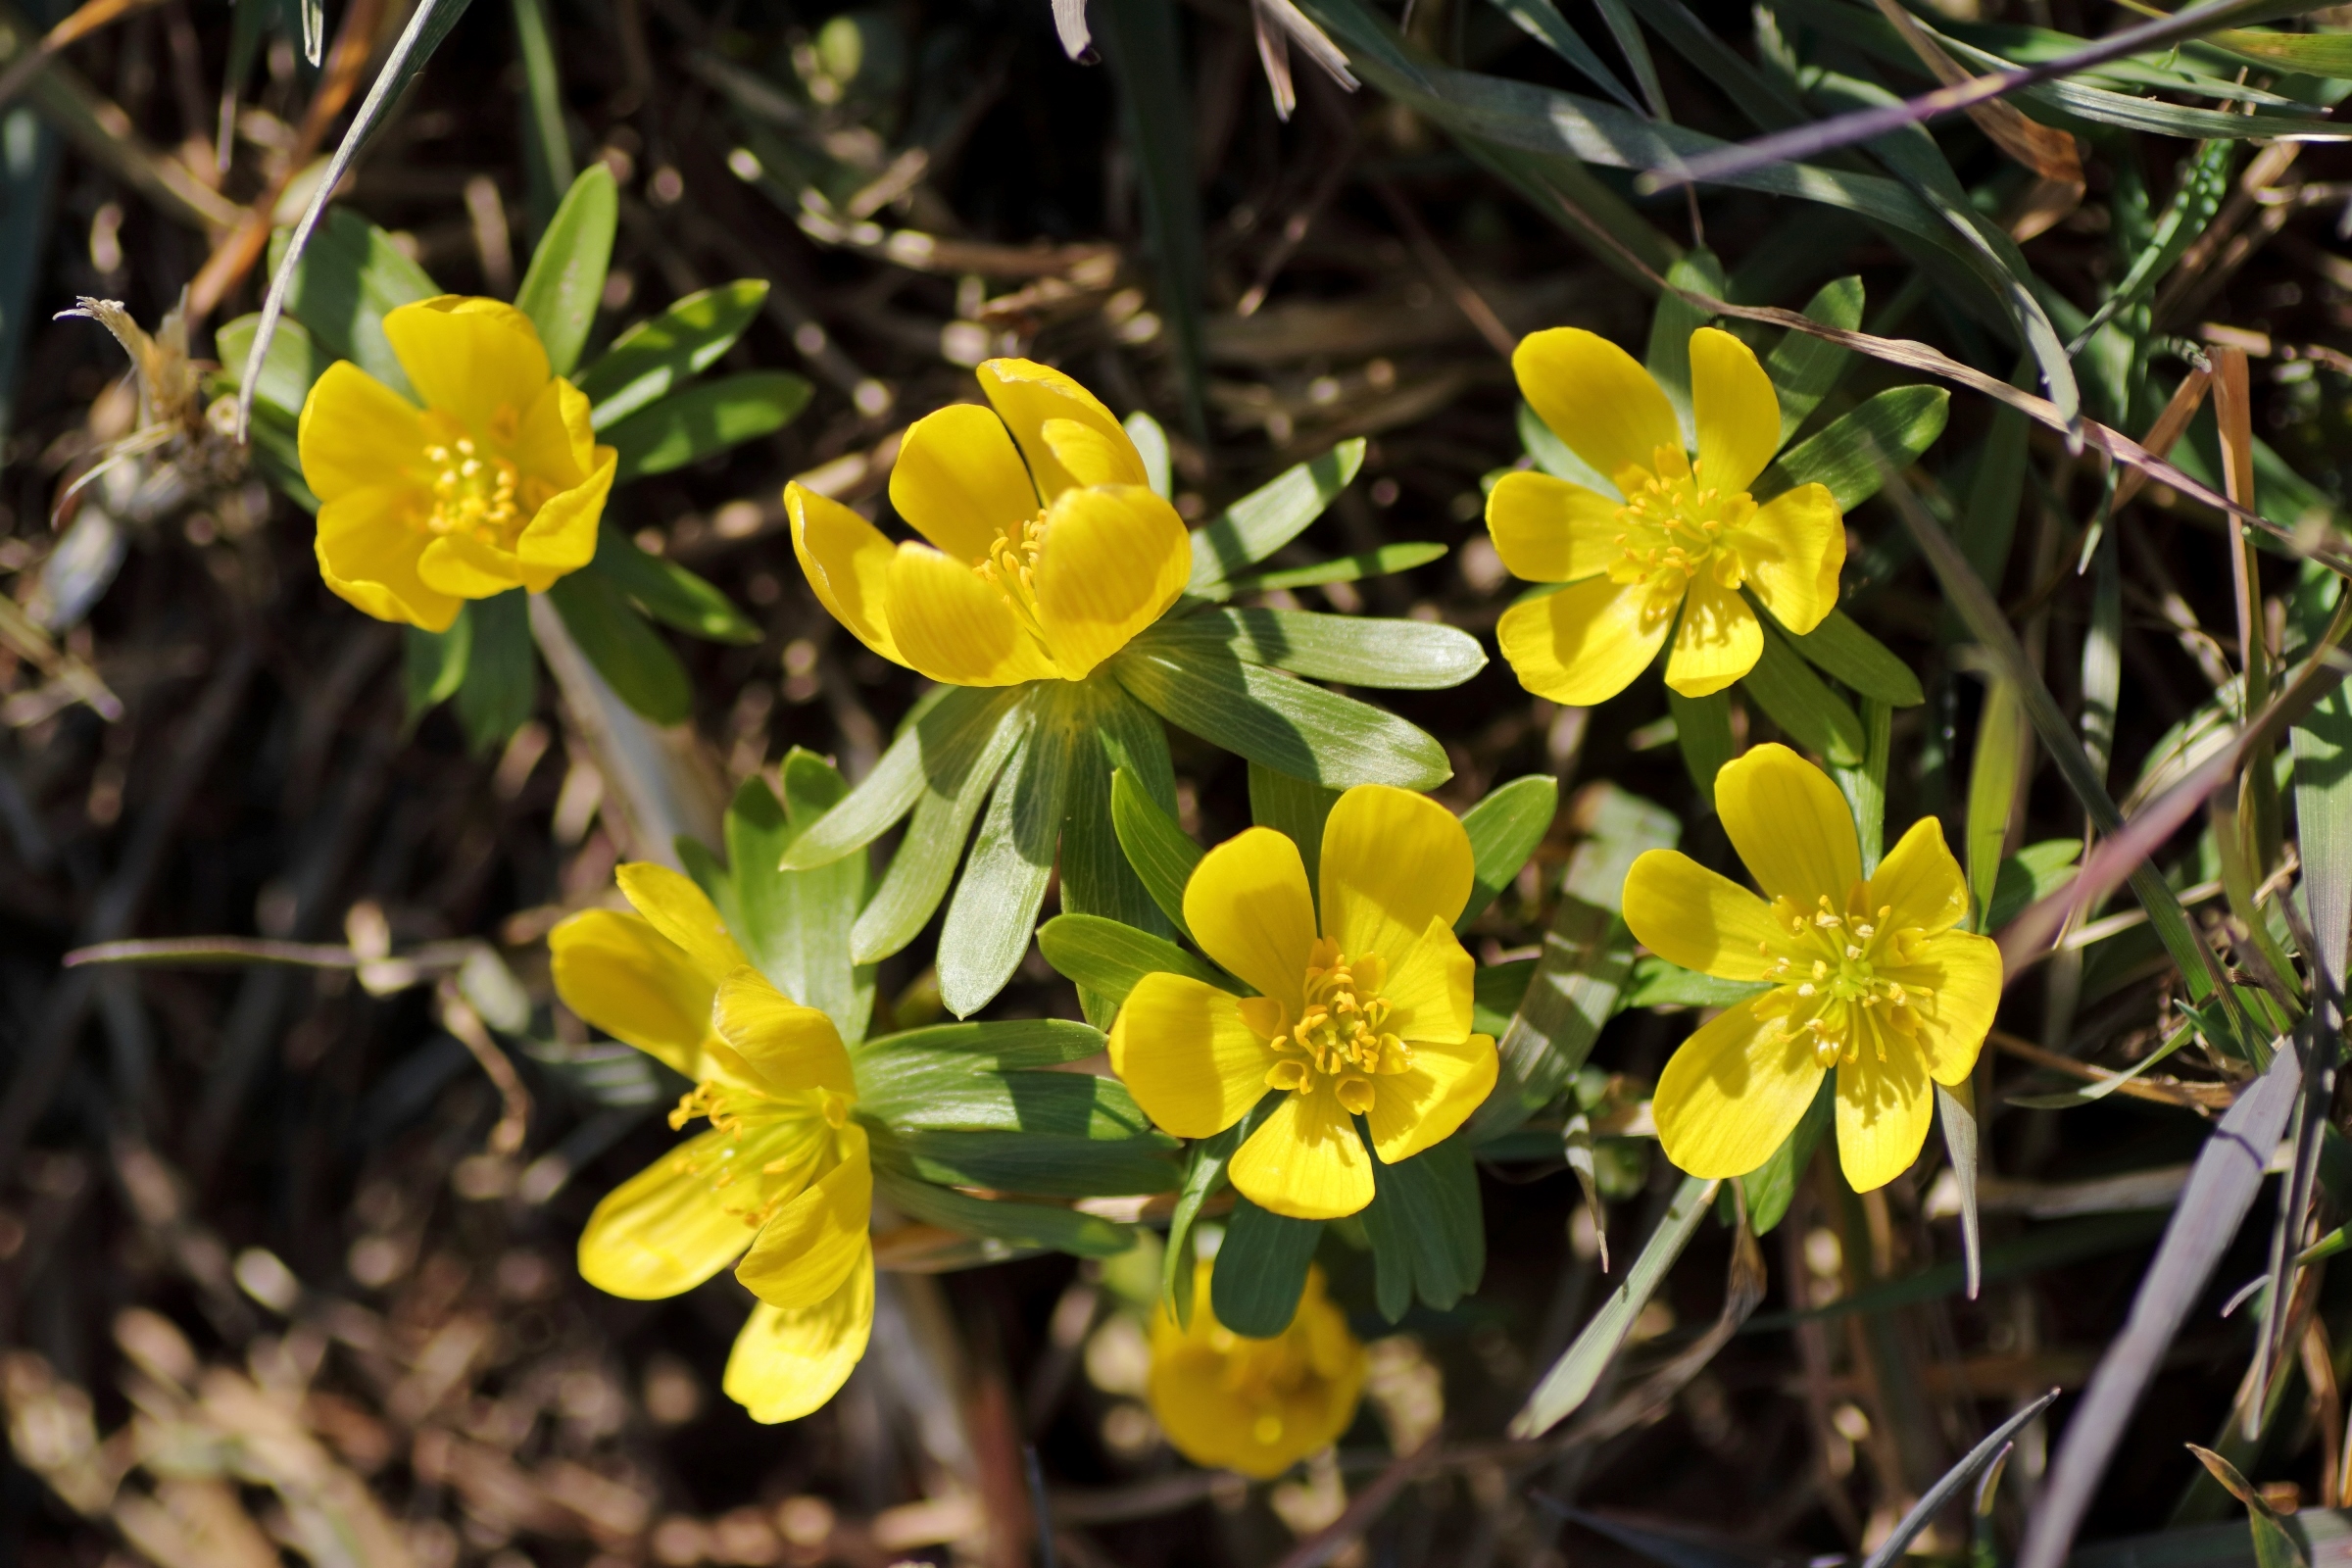 A group of winter aconites